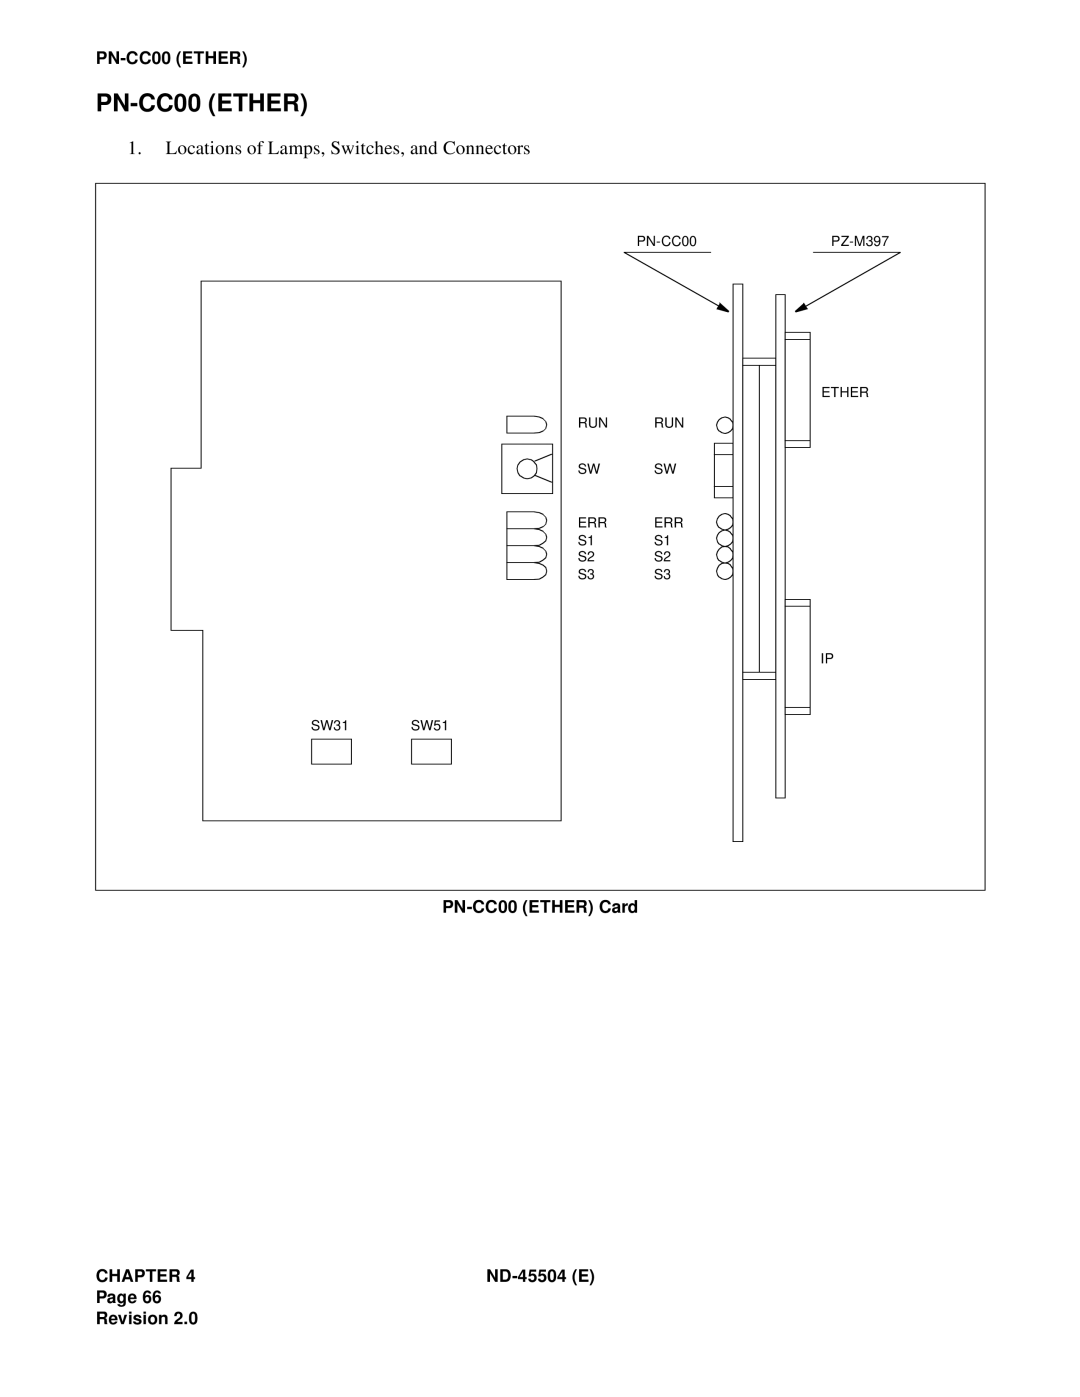 NEC 2000 IVS manual Locations of Lamps, Switches, and Connectors, PN-CC00ETHER Card, Chapter, ND-45504E, Page Revision 